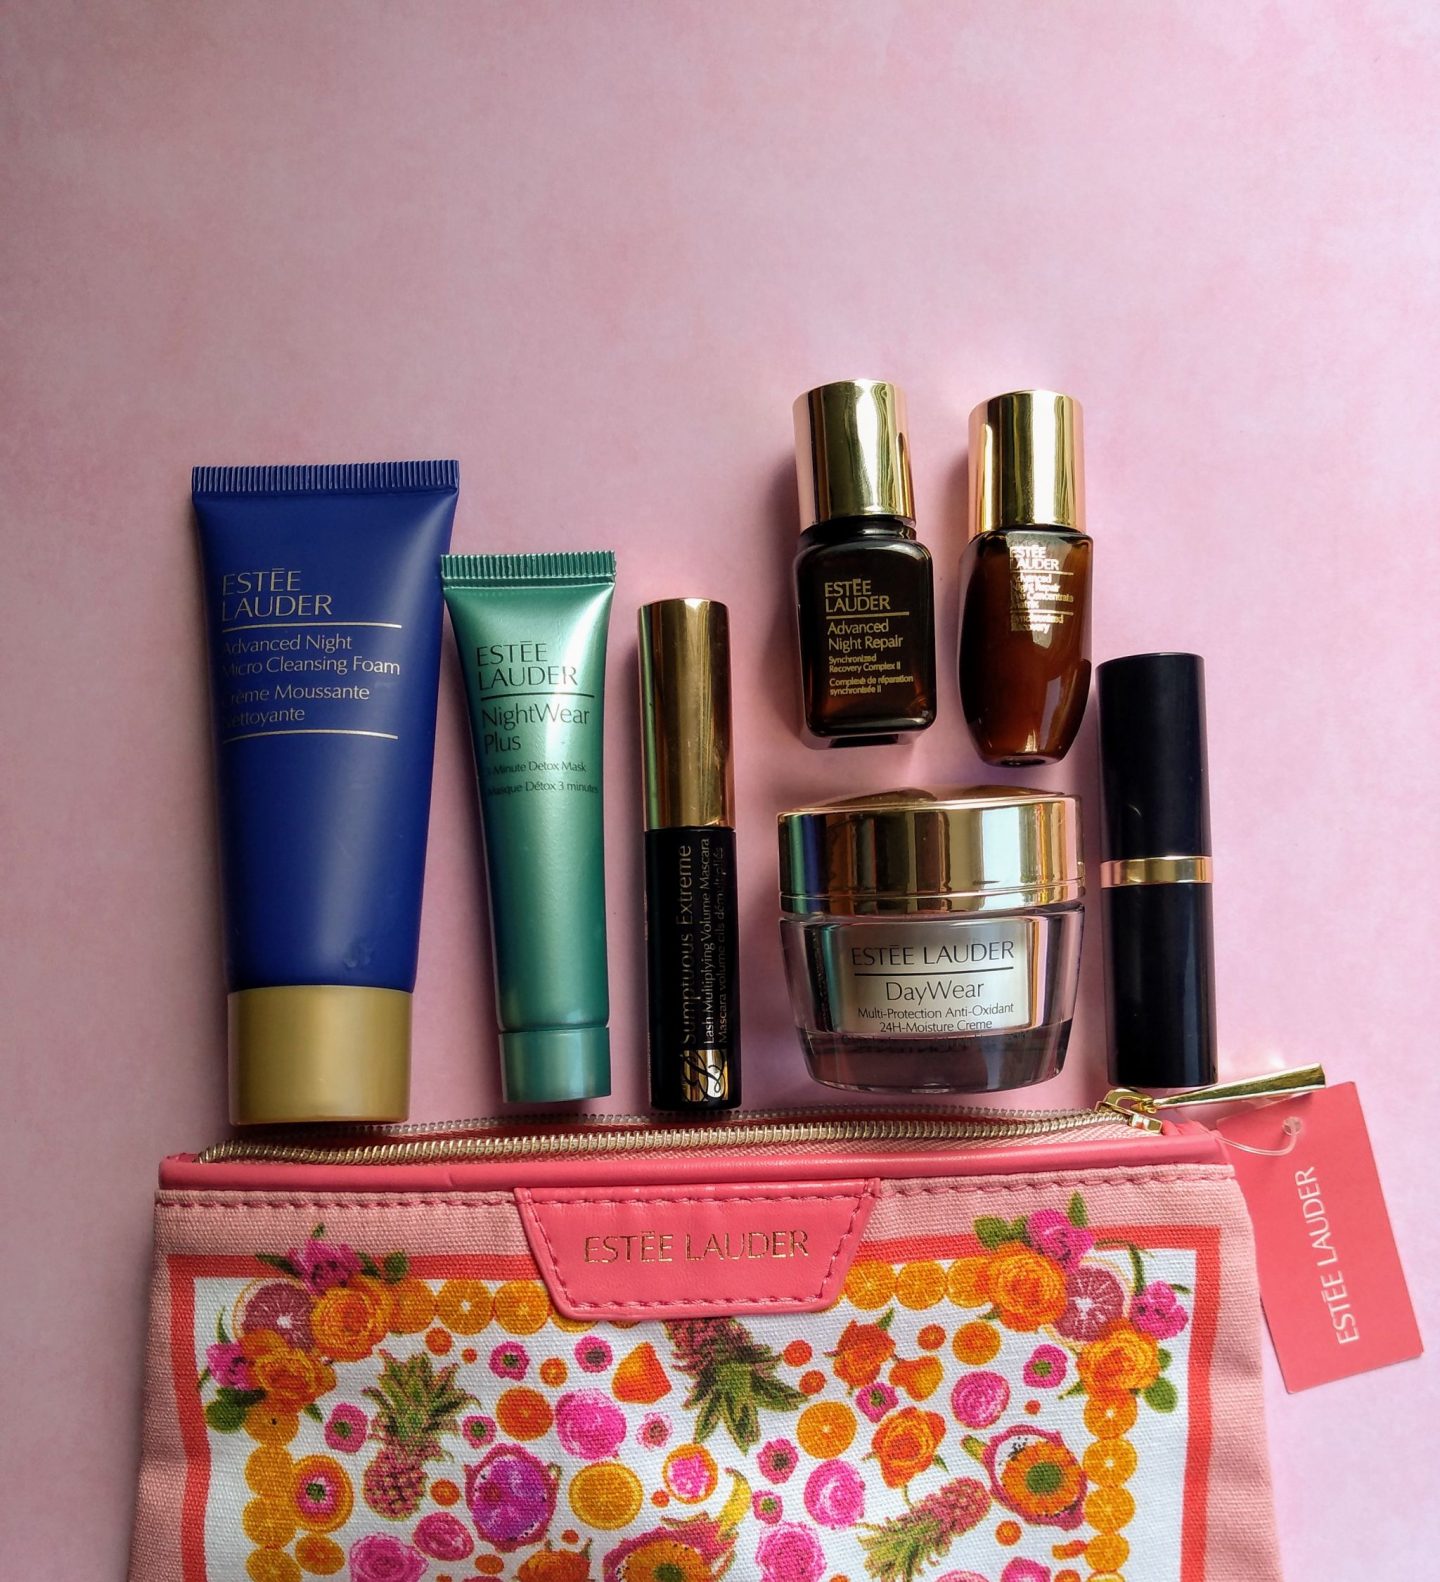 Estee Lauder Spring 2019 Gift Review